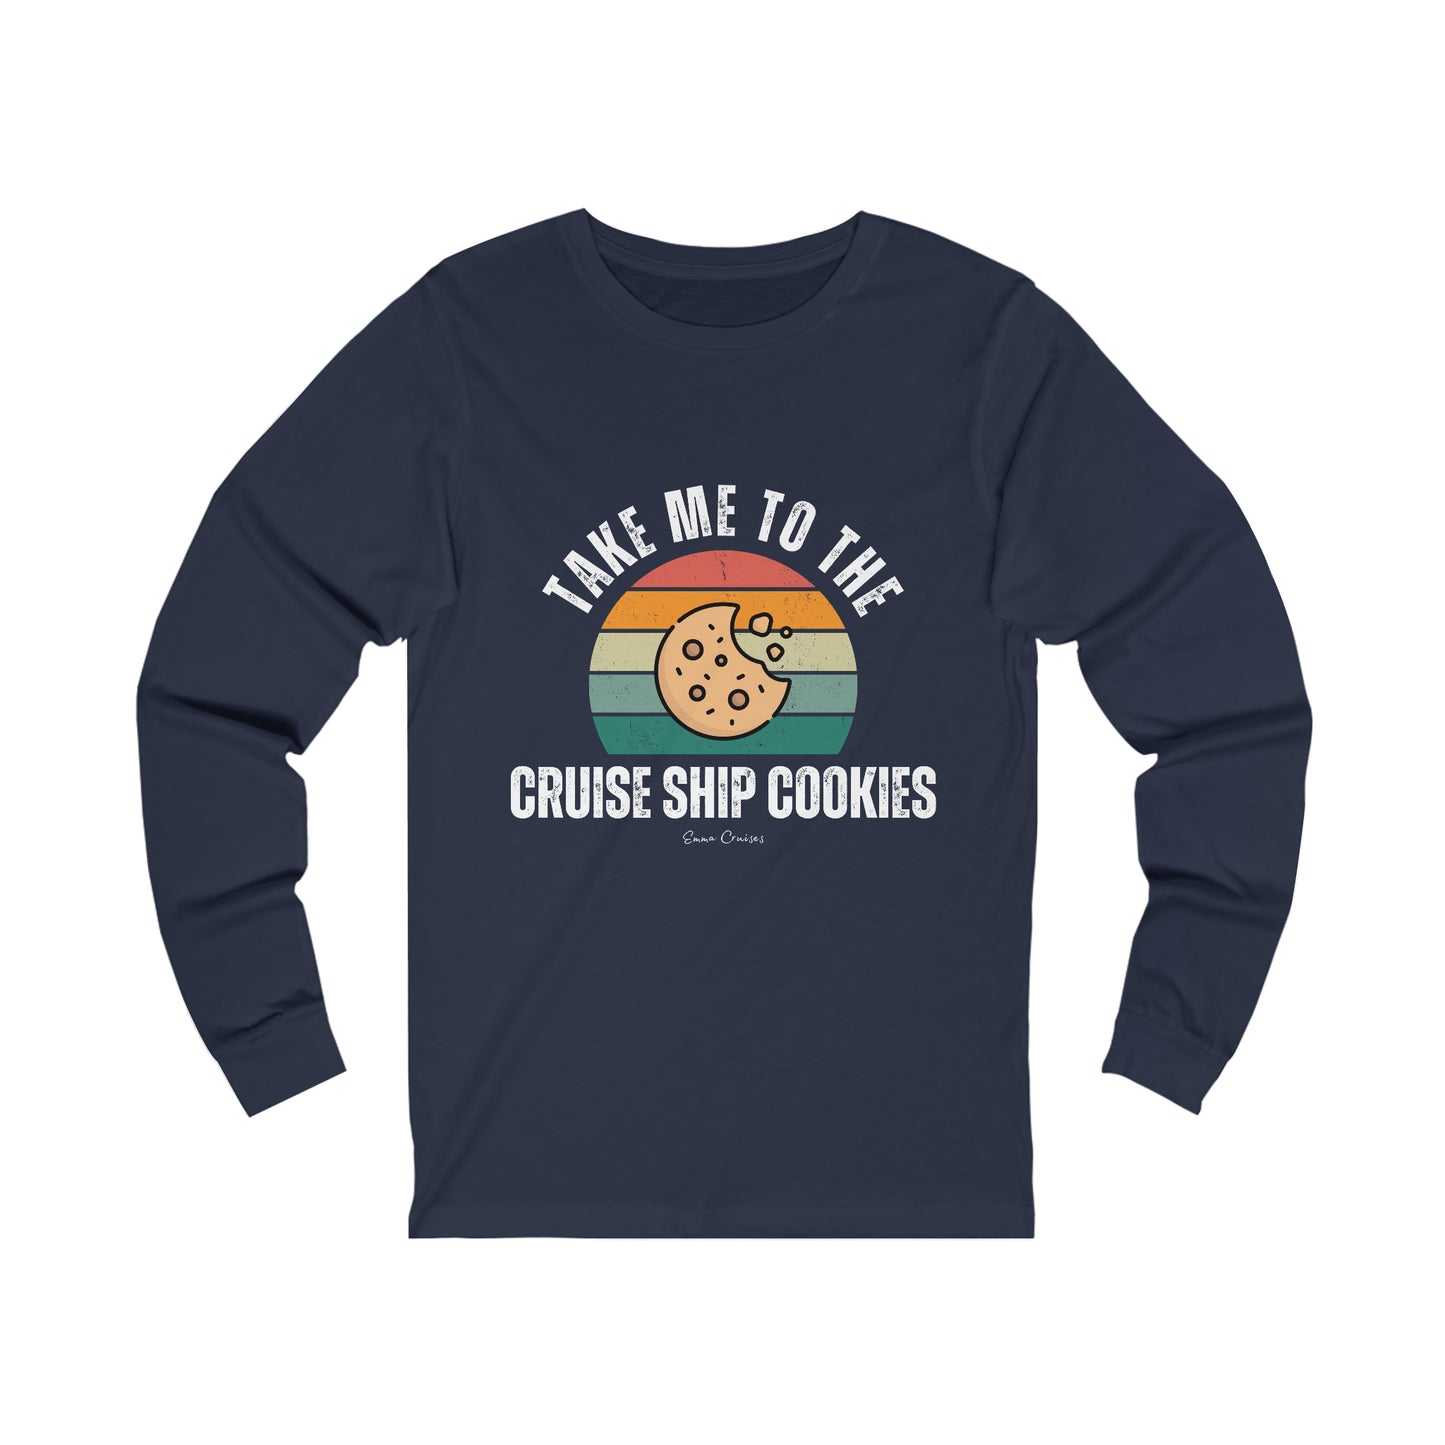 Take Me to the Cruise Ship Cookies - UNISEX T-Shirt